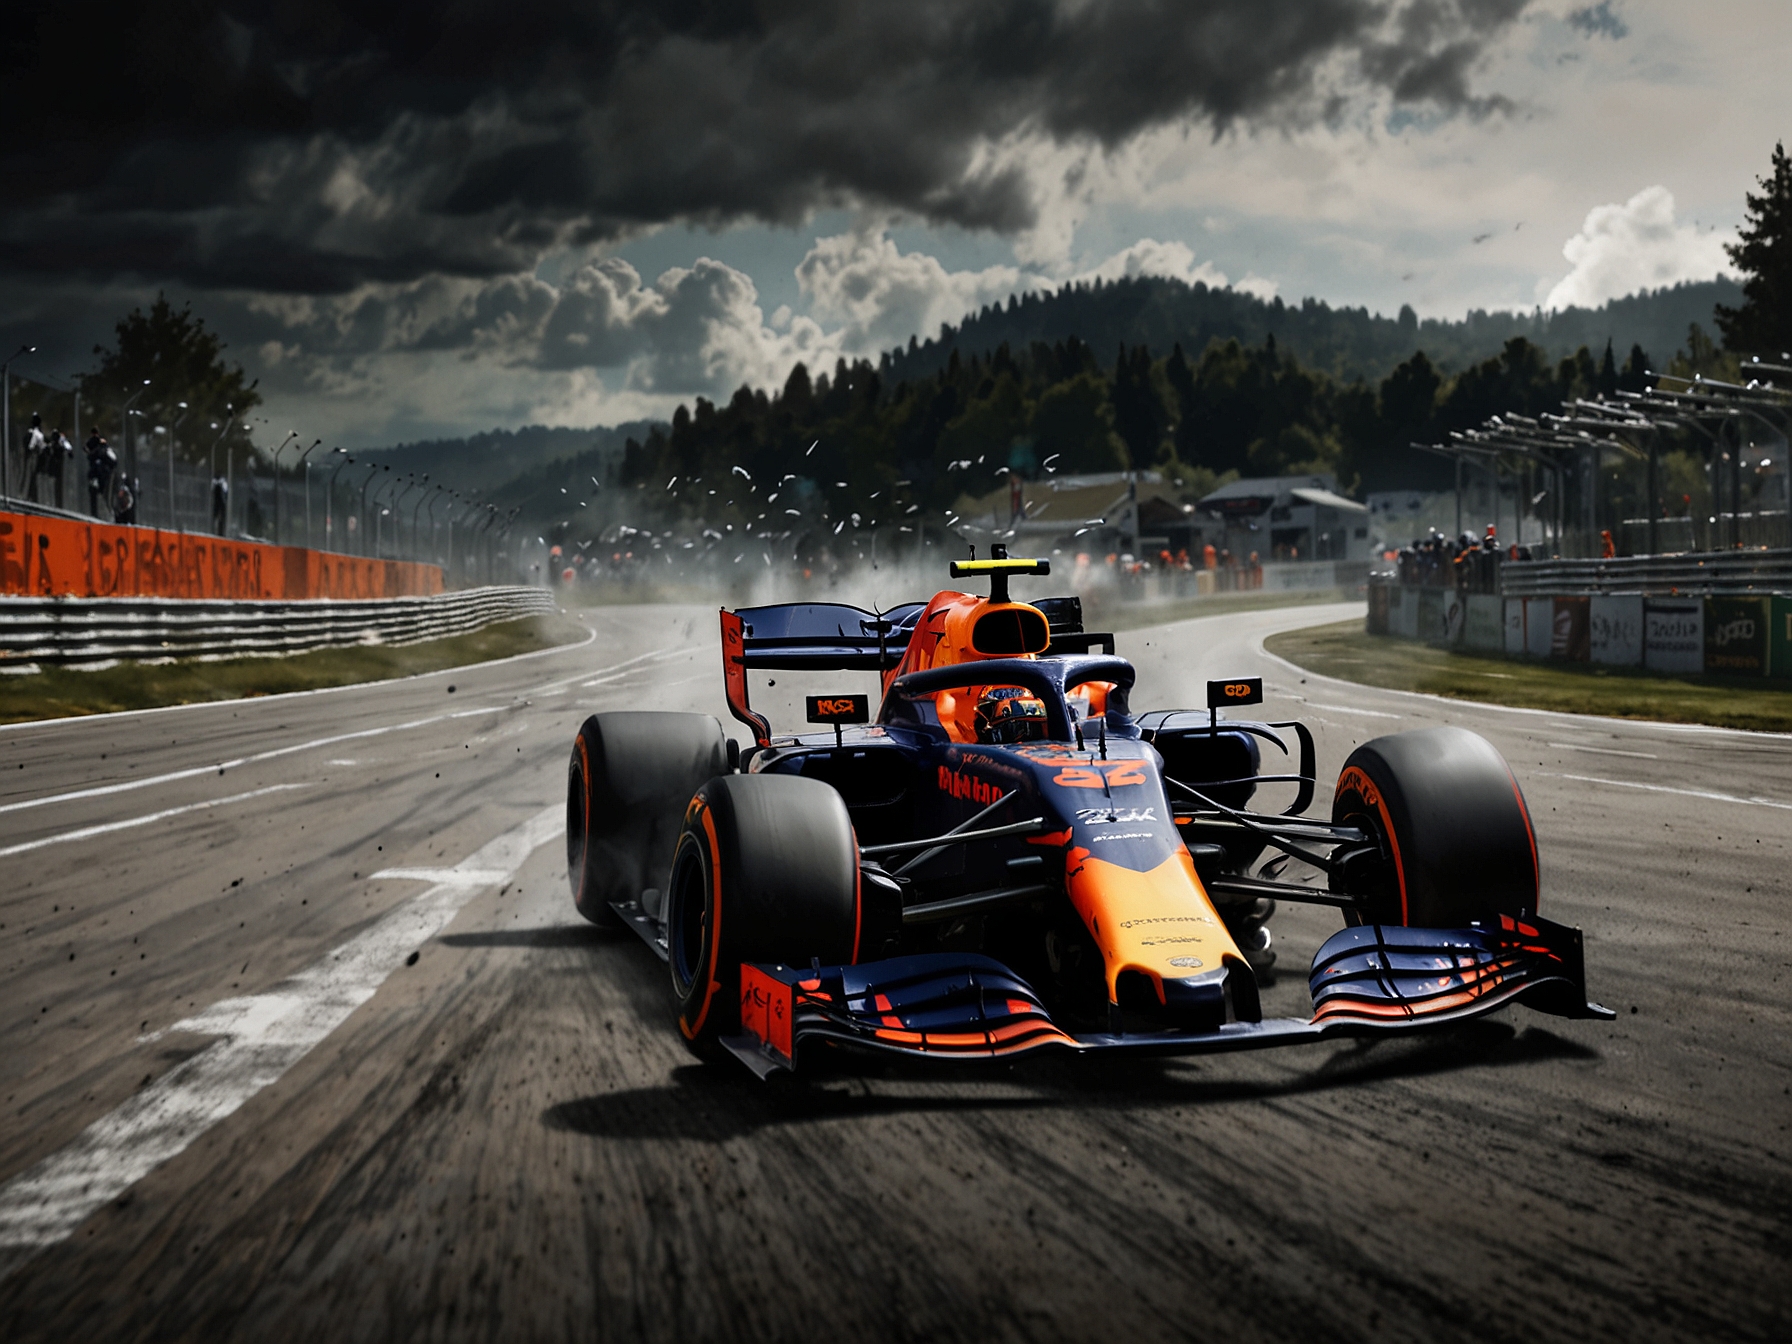 An intense moment from the Austrian Grand Prix showing Max Verstappen in close pursuit of Lando Norris, capturing the fierce competition and strategic maneuvers that defined their race.